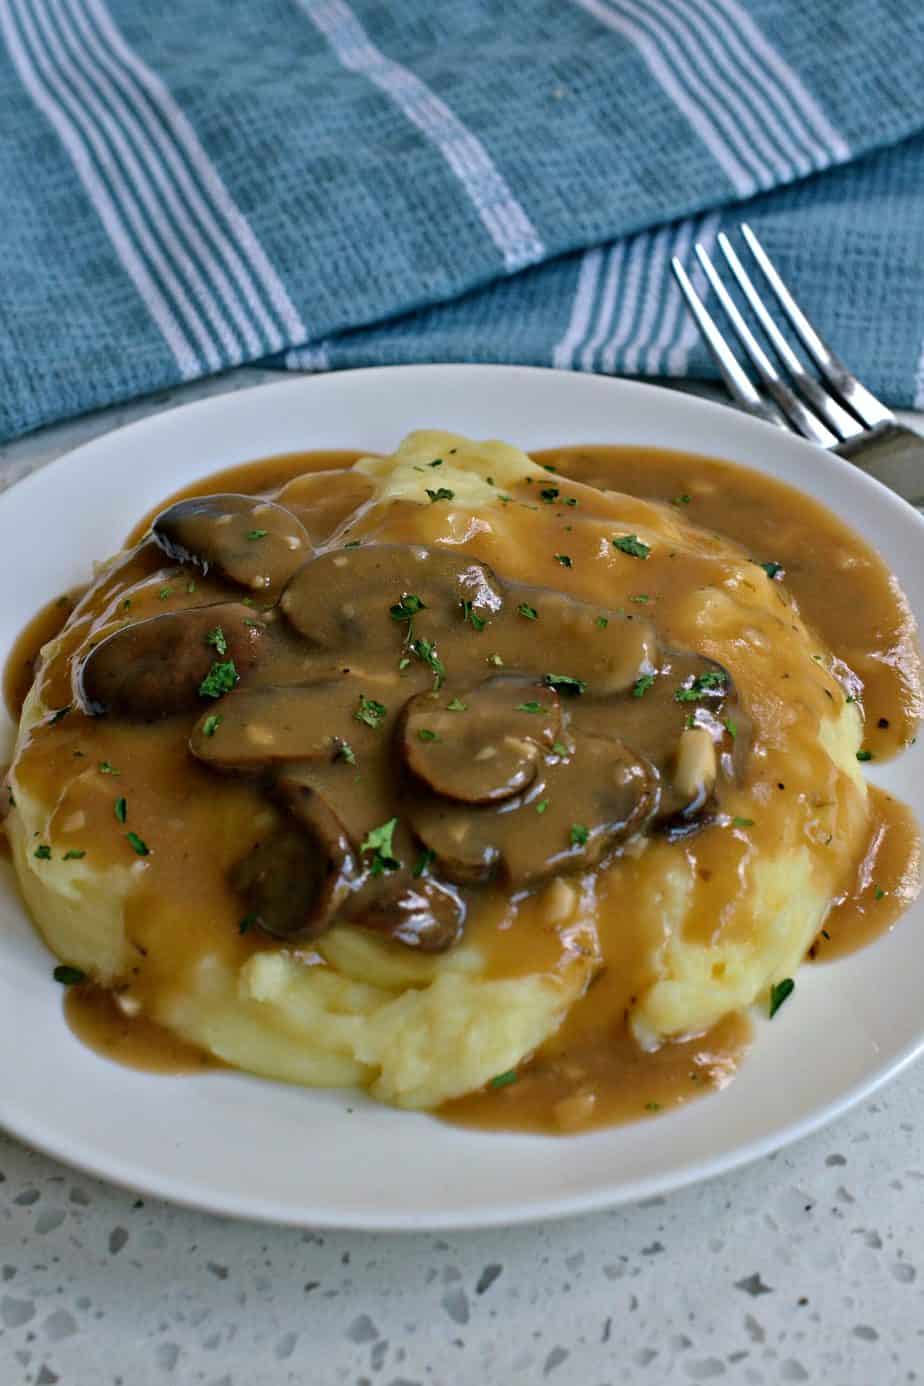 This super easy rich and flavorful Mushroom Gravy comes together with six ingredients in less than thirty minutes.